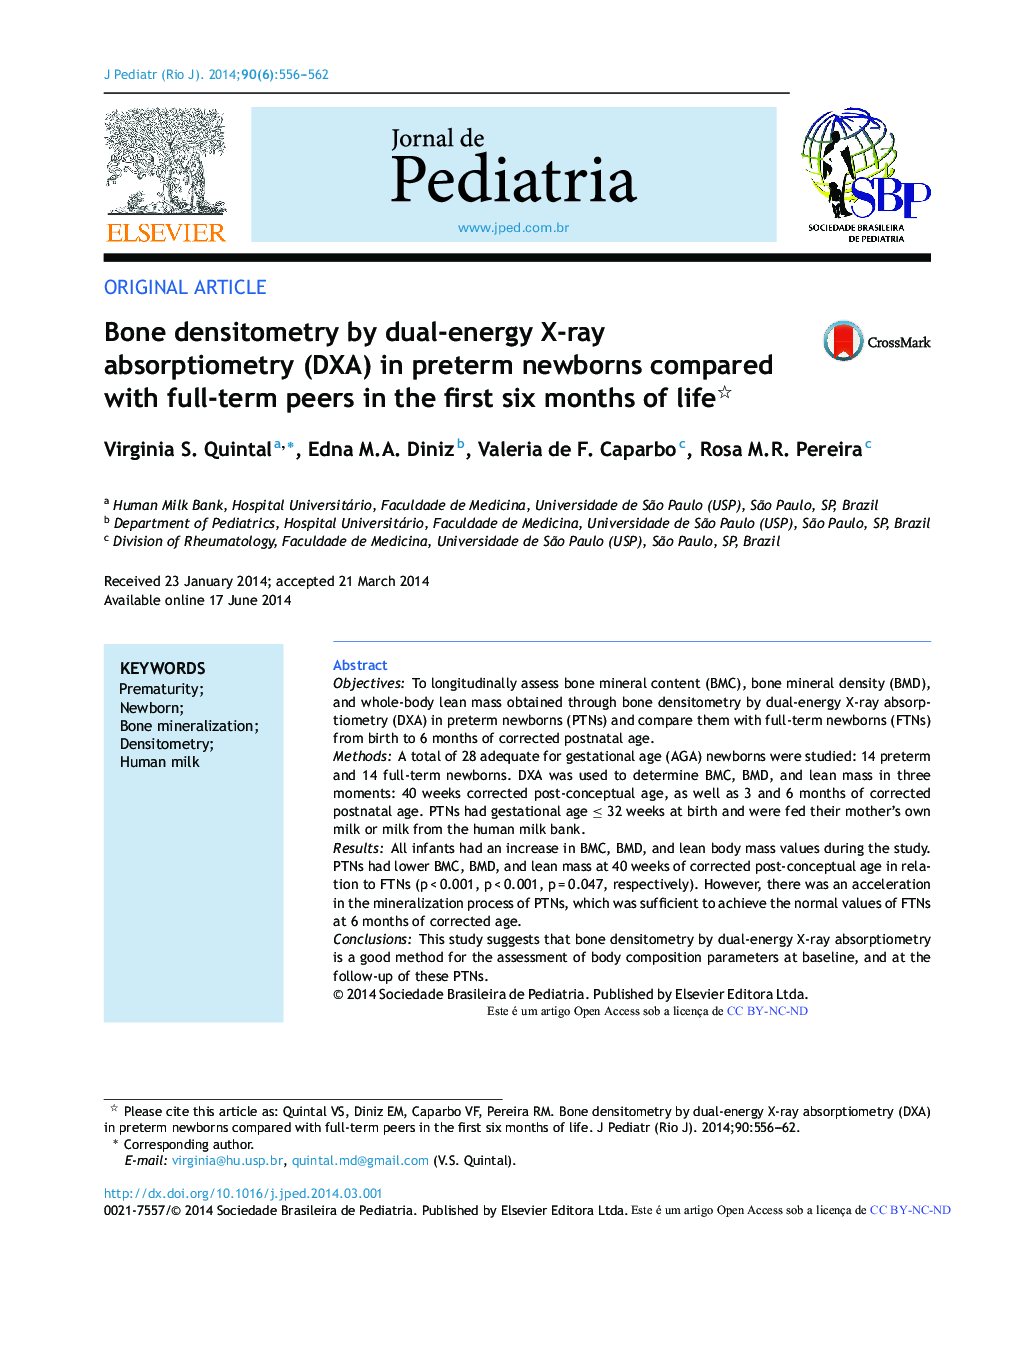 Bone densitometry by dual-energy X-ray absorptiometry (DXA) in preterm newborns compared with full-term peers in the first six months of life 